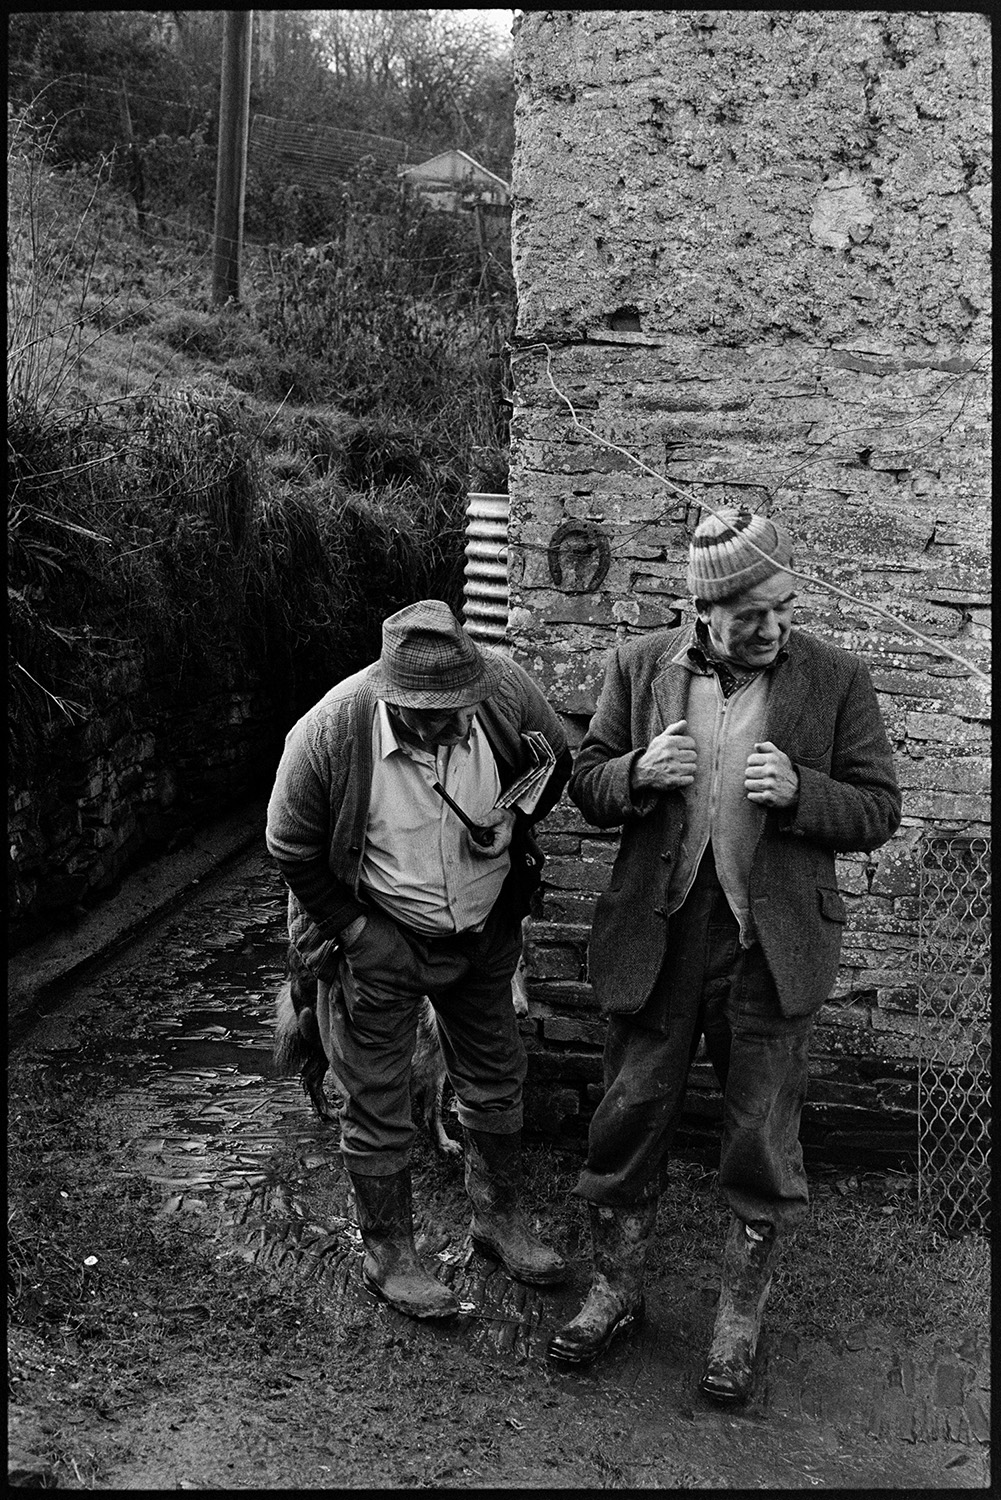 Two farmers chatting. 
[Archie Parkhouse, holding a pipe, and Frank Pickard chatting by a stone wall at Millhams, Dolton. A horse show is hung on the wall behind them. They are both wearing hats and wellington boots.]